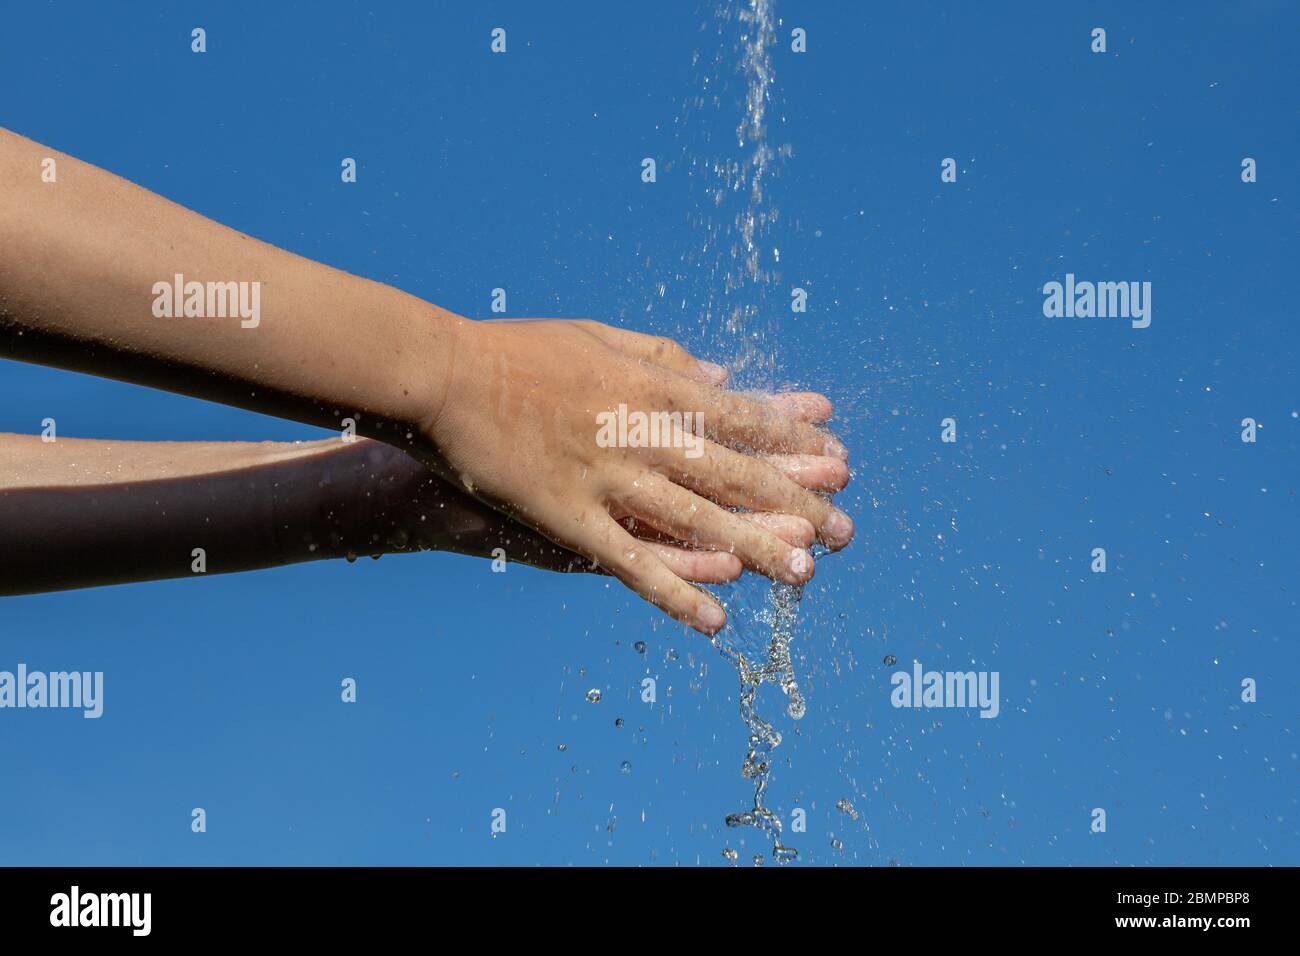 Young people rub and wash their hands under water jet Stock Photo